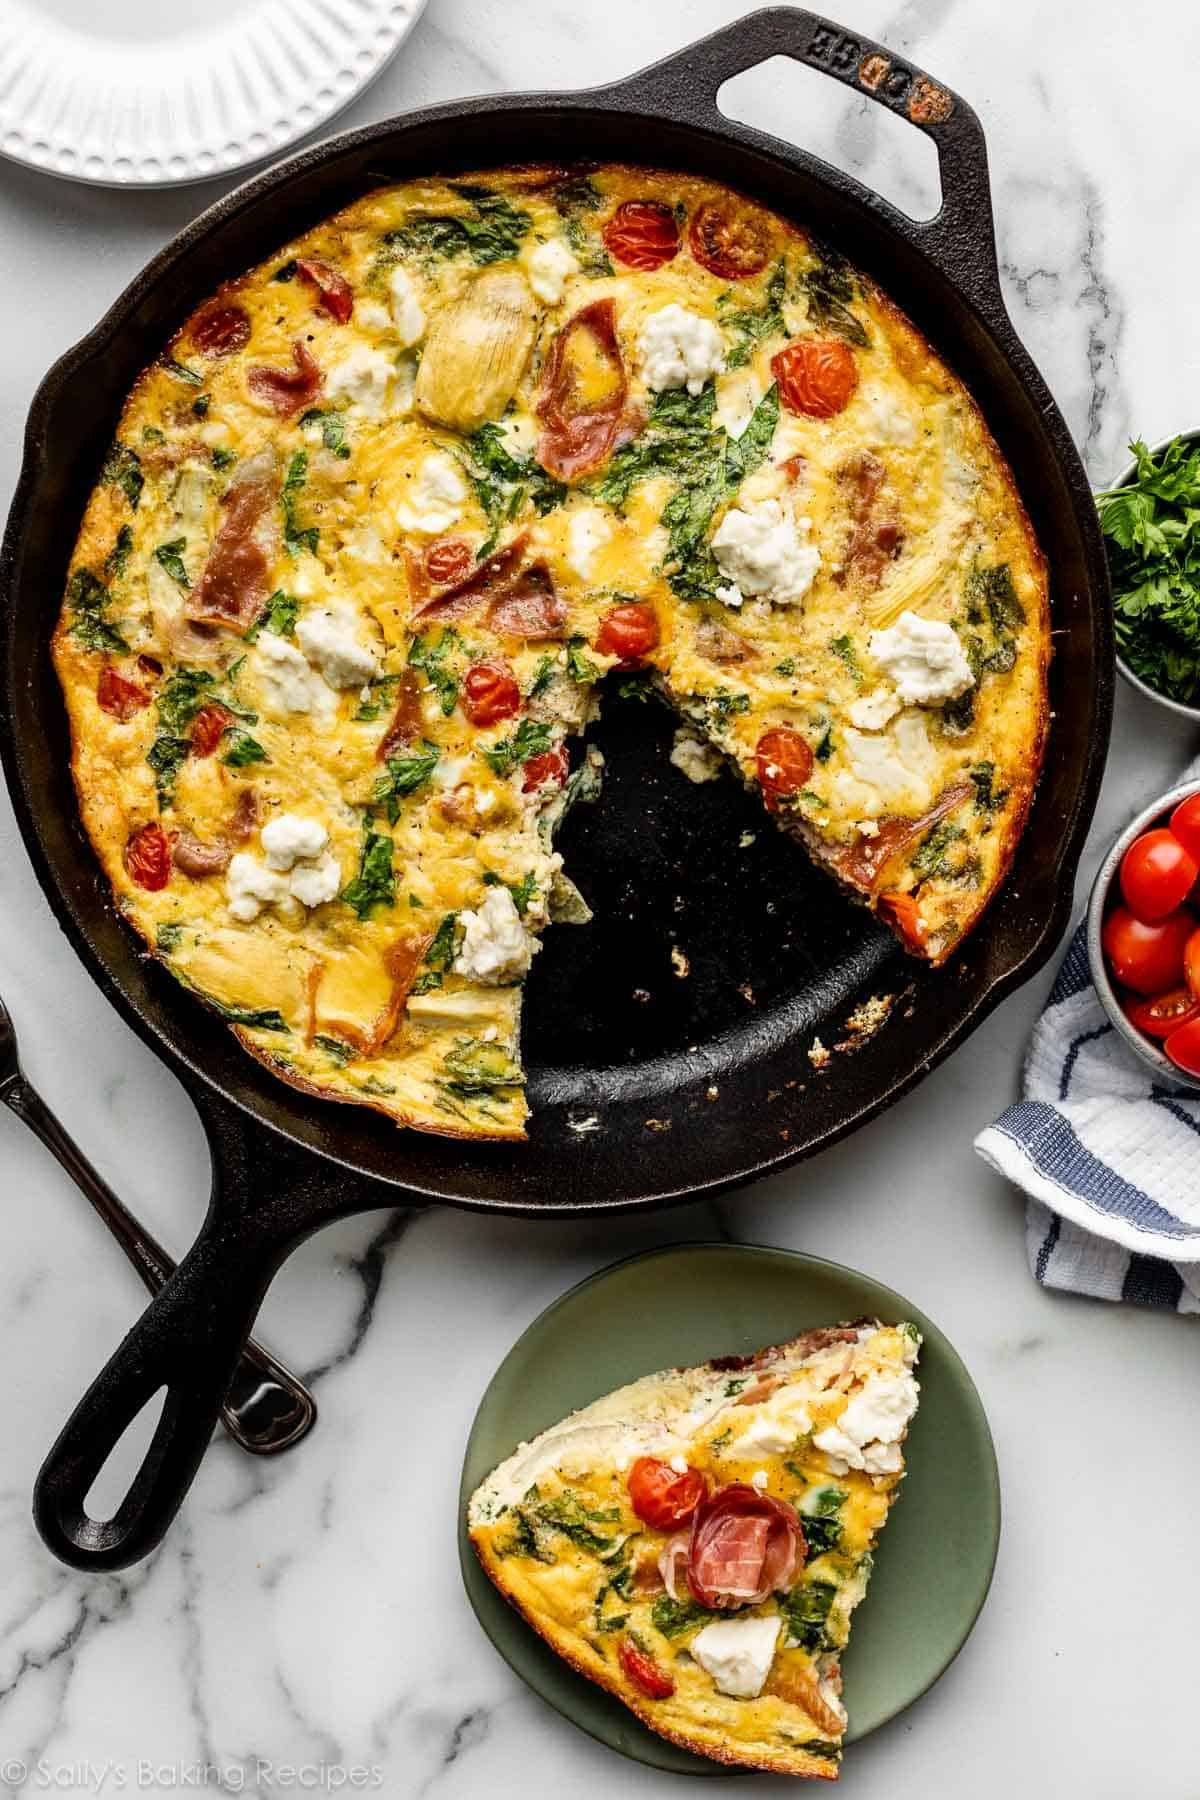 Mediterranean-inspired frittata in cast iron skillet with slice taken out and placed on green plate next to it.